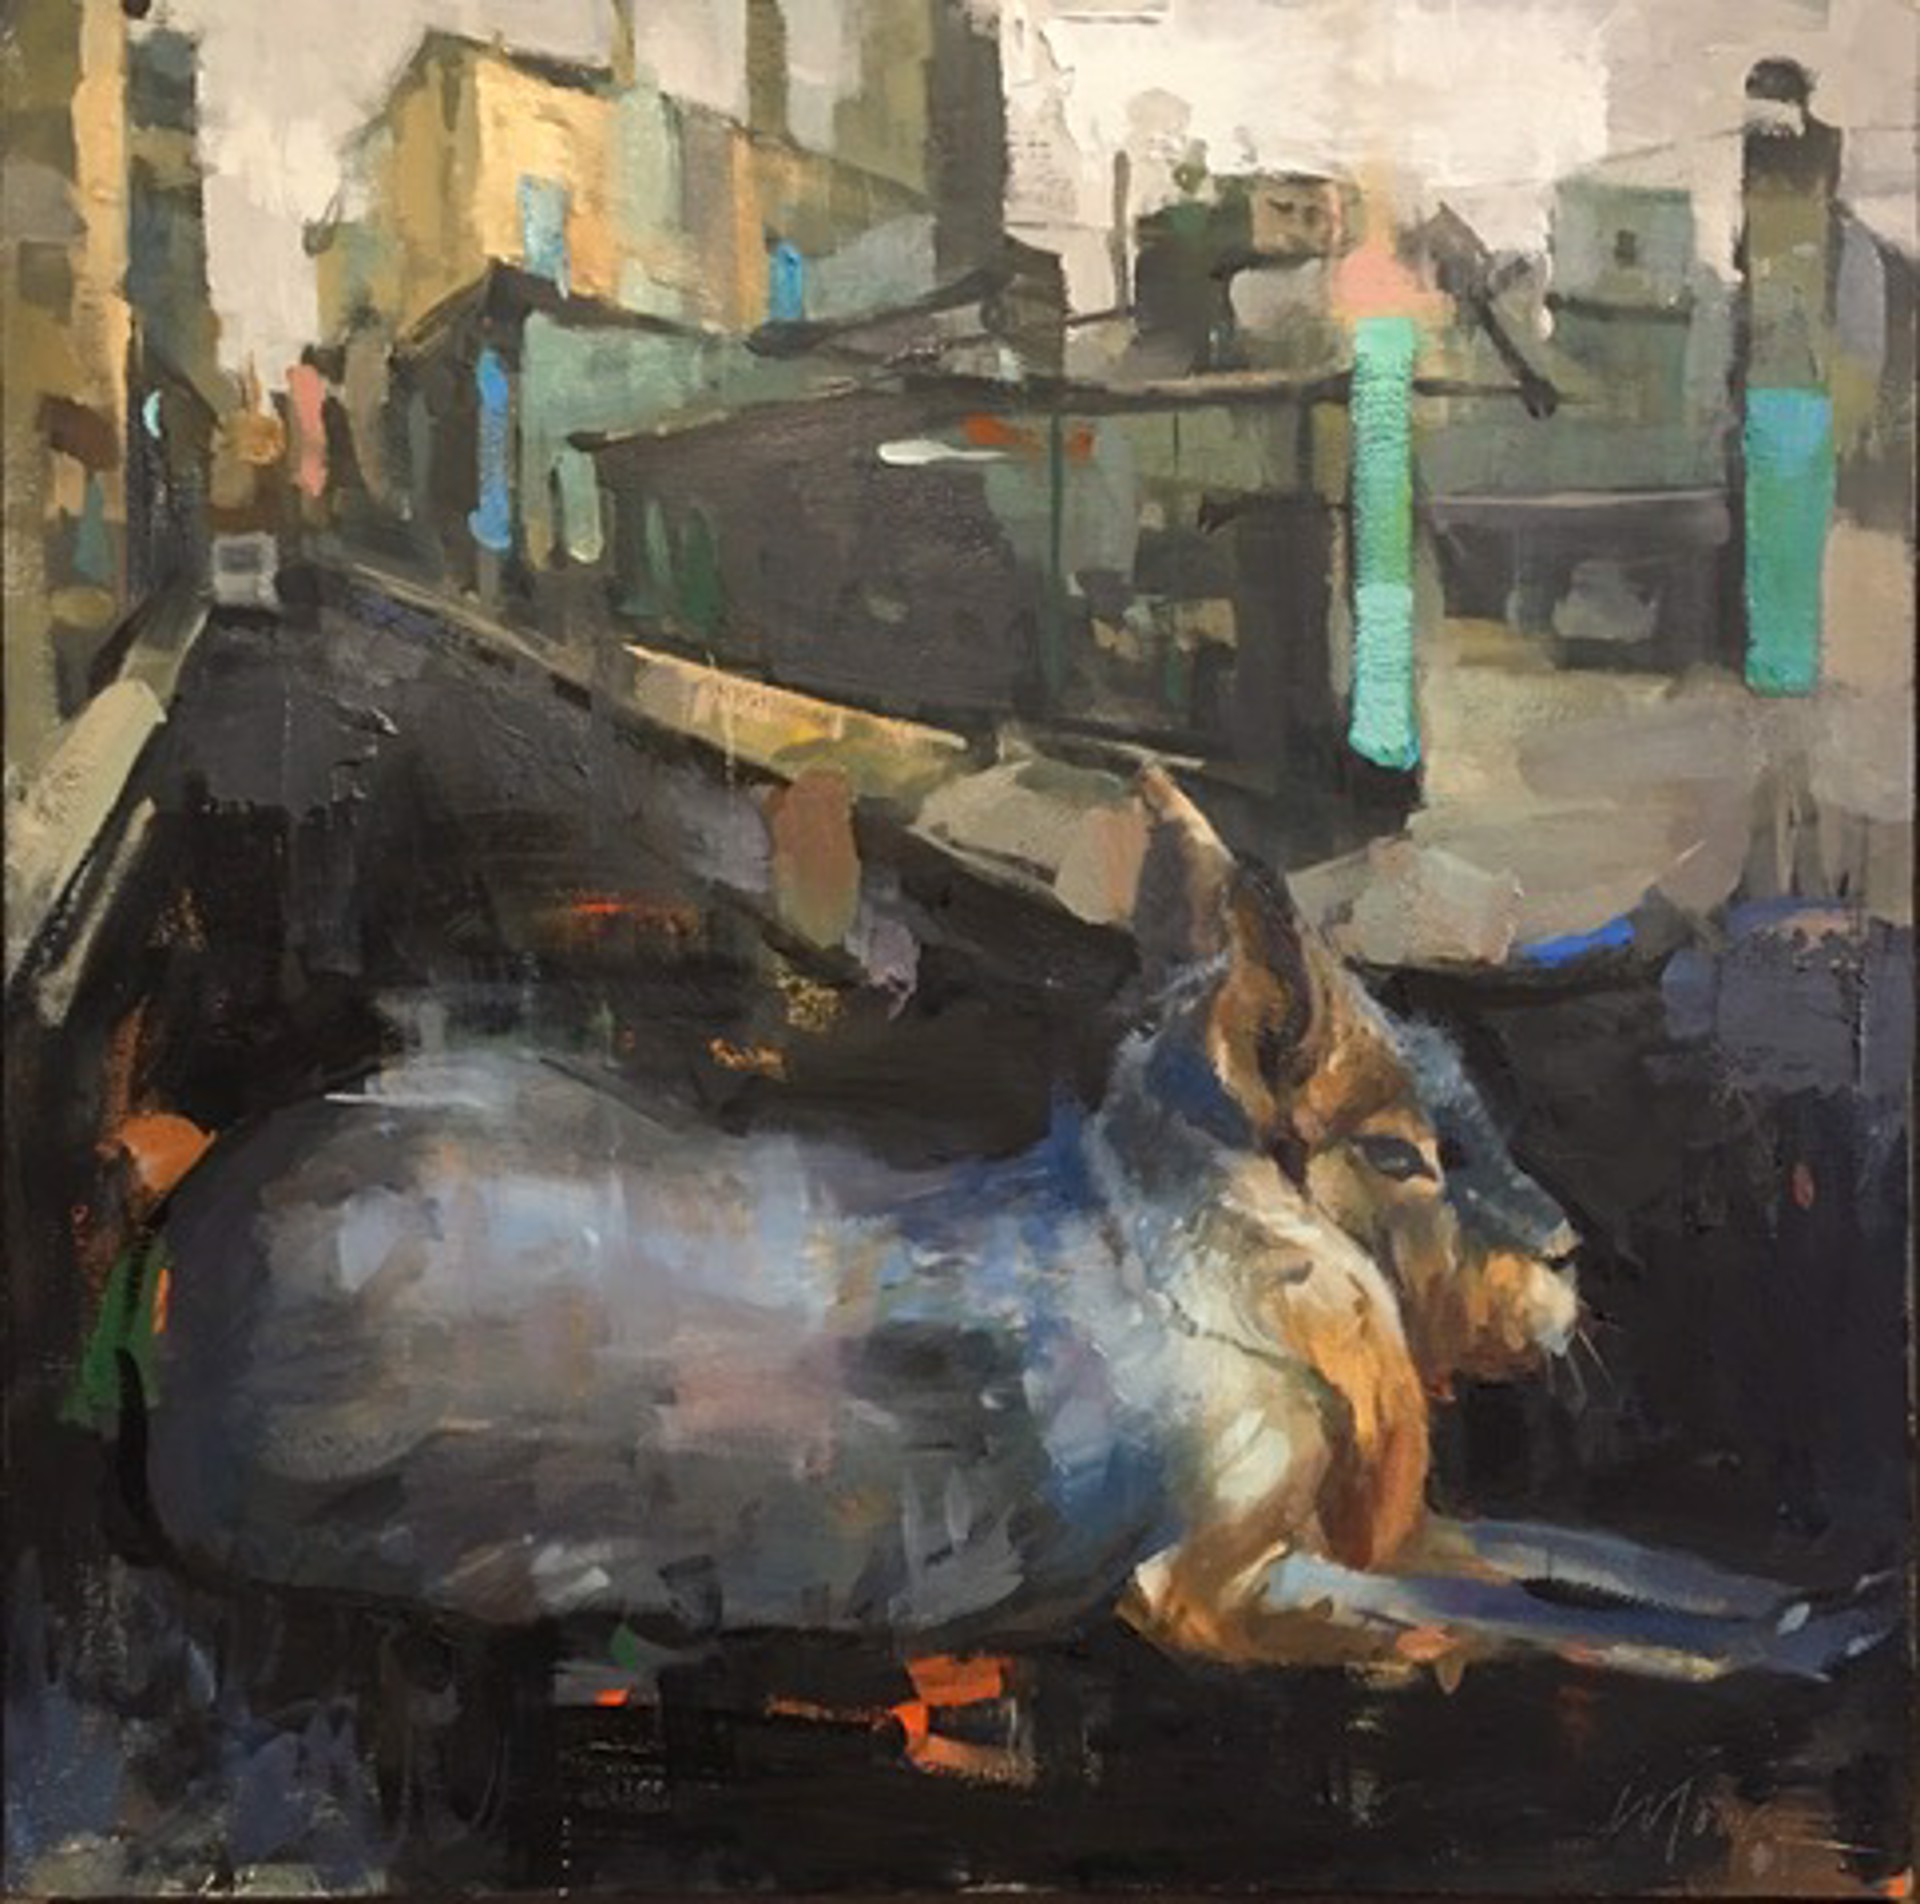 Oil Painting Of A Patagonian Cavy Similar To Rabbit Laying In Abandon City Street, Unique Perspective, Urban Wildlife, Available at Gallery Wild  